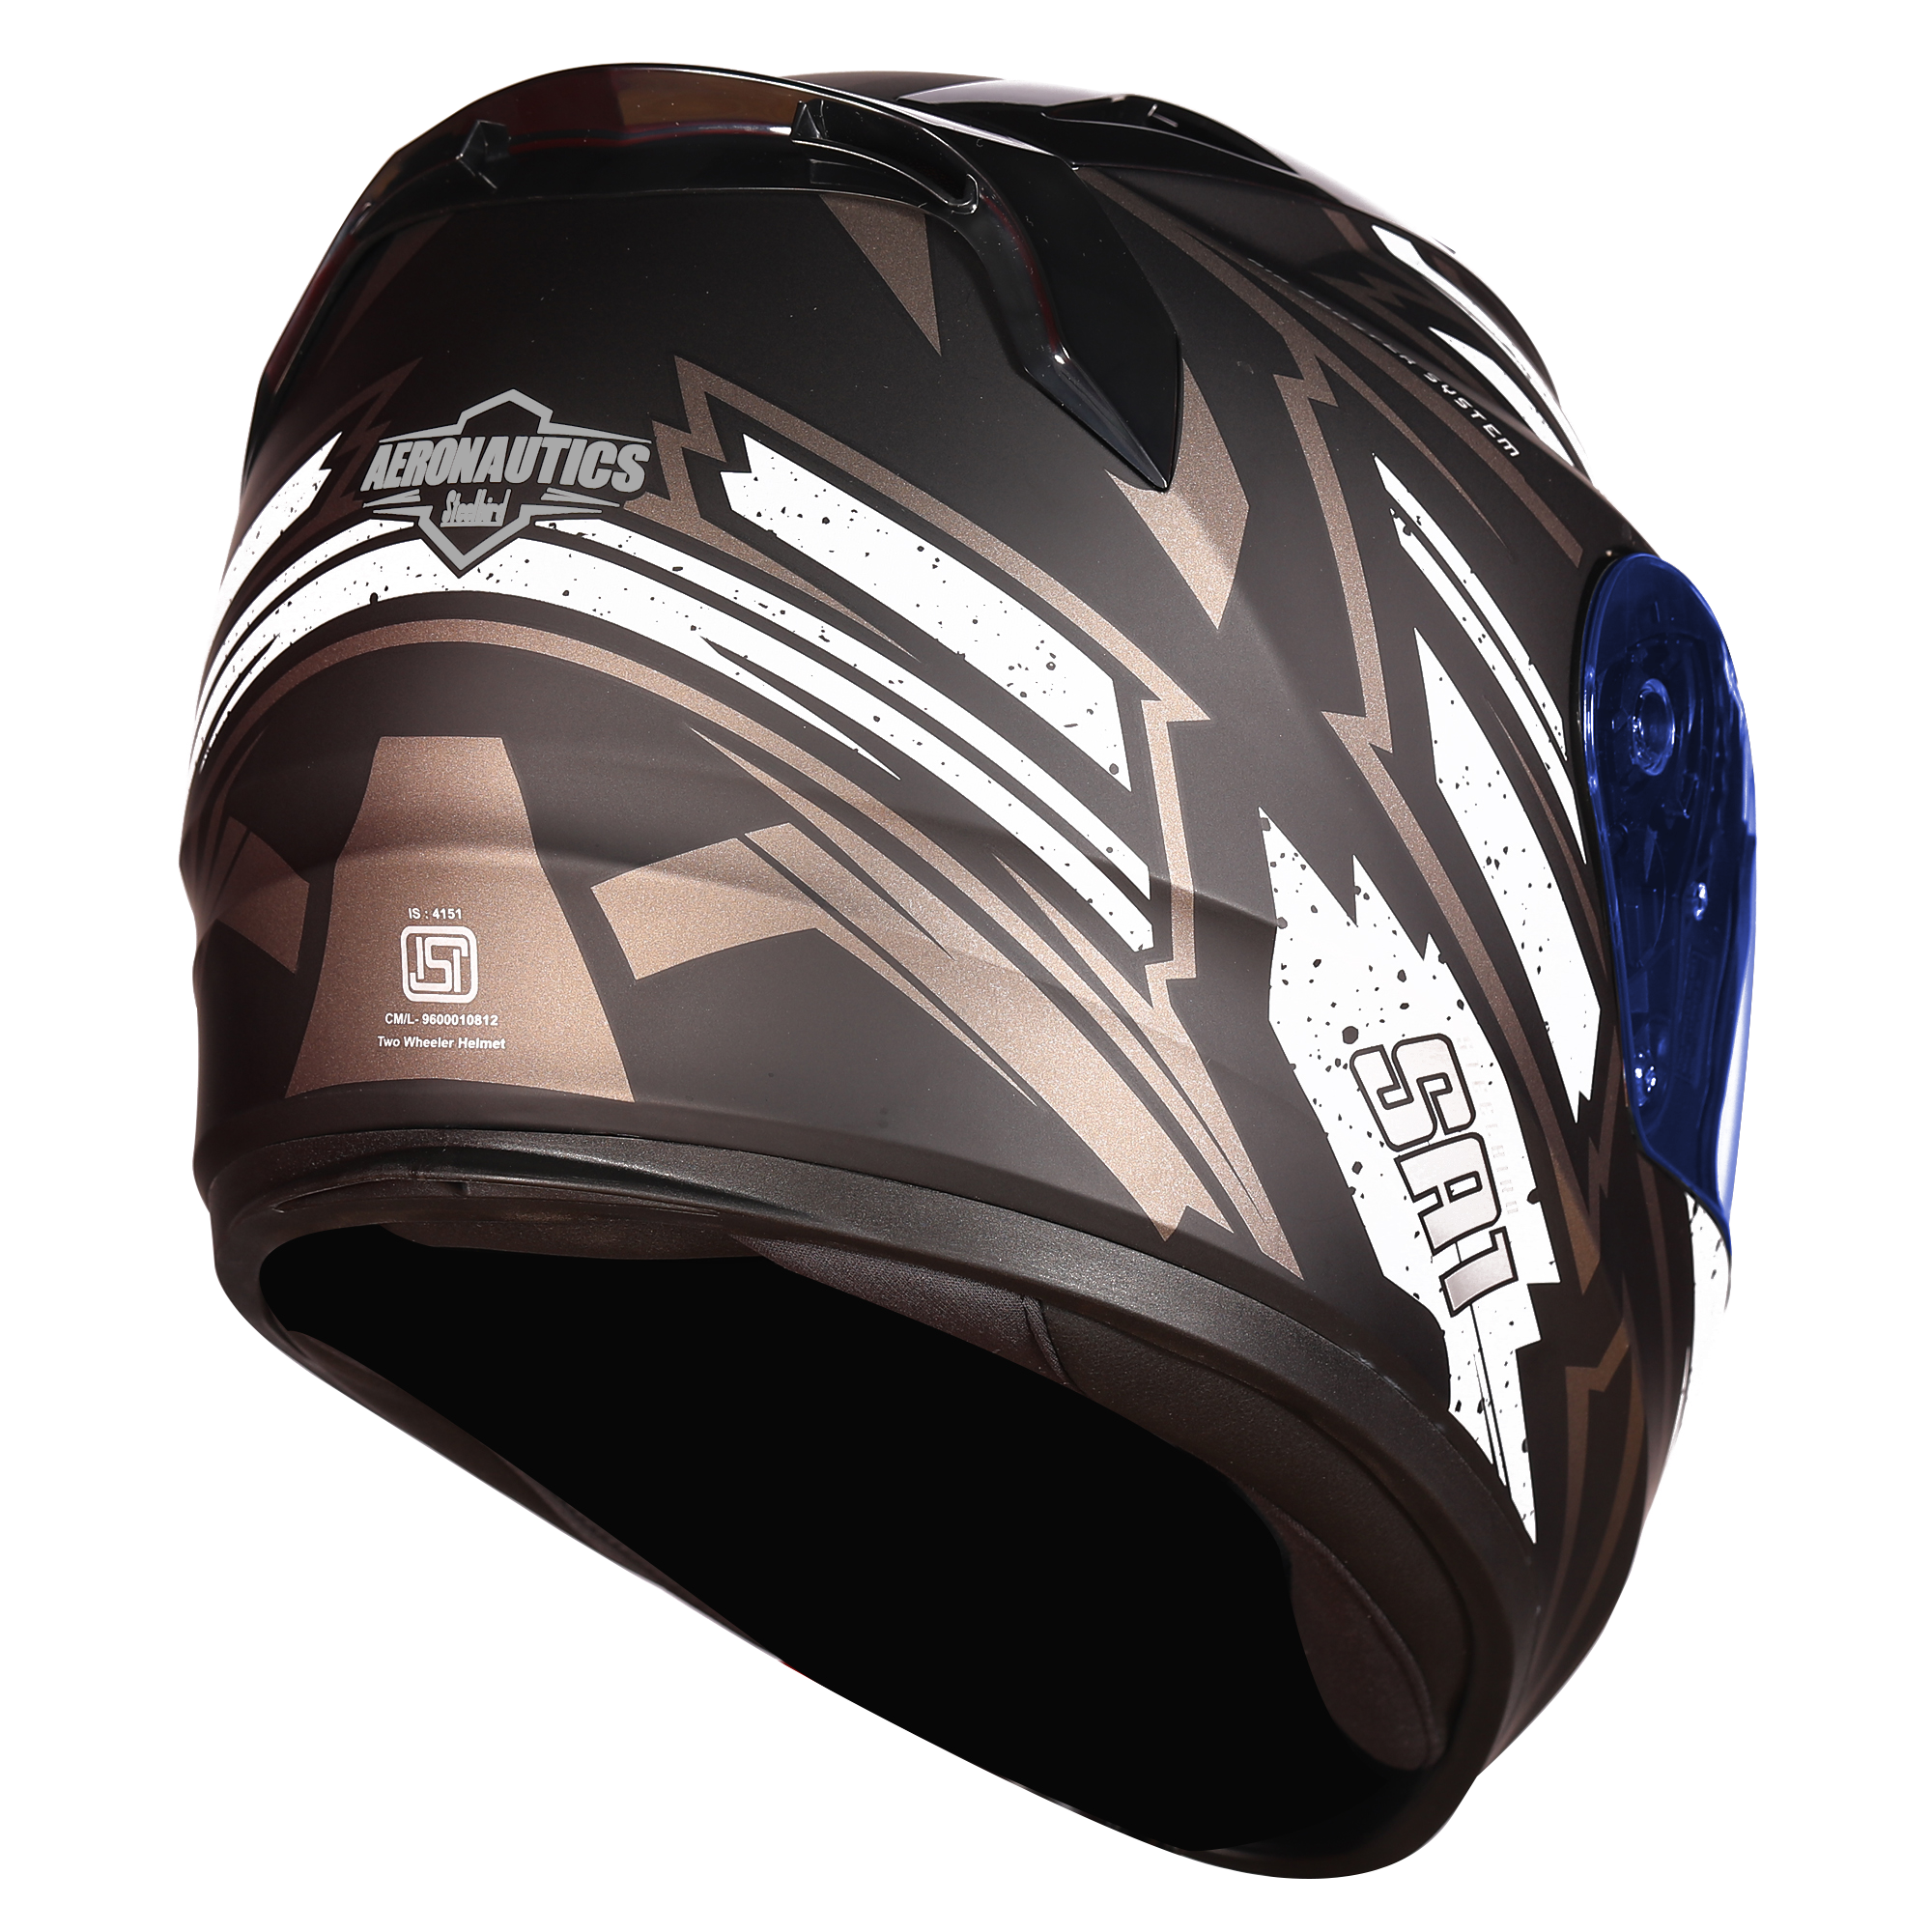 SA-1 BOOSTER MAT BLACK WITH GREY - NIGHT VISION BLUE VISOR (WITH EXTRA CLEAR VISOR)